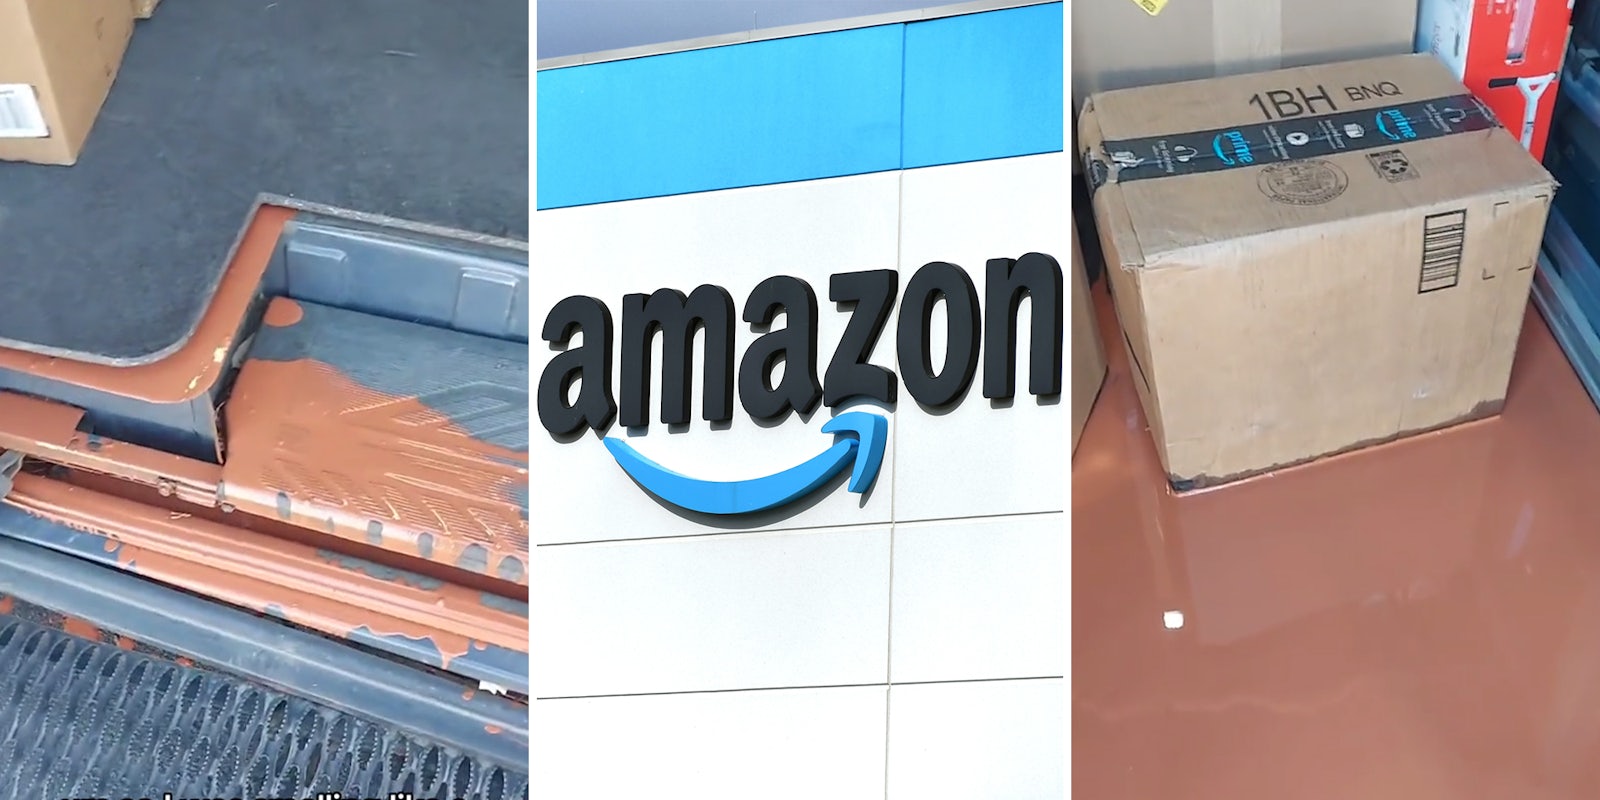 Amazon delivery driver smells paint. She discovers a package that leaked through her entire van